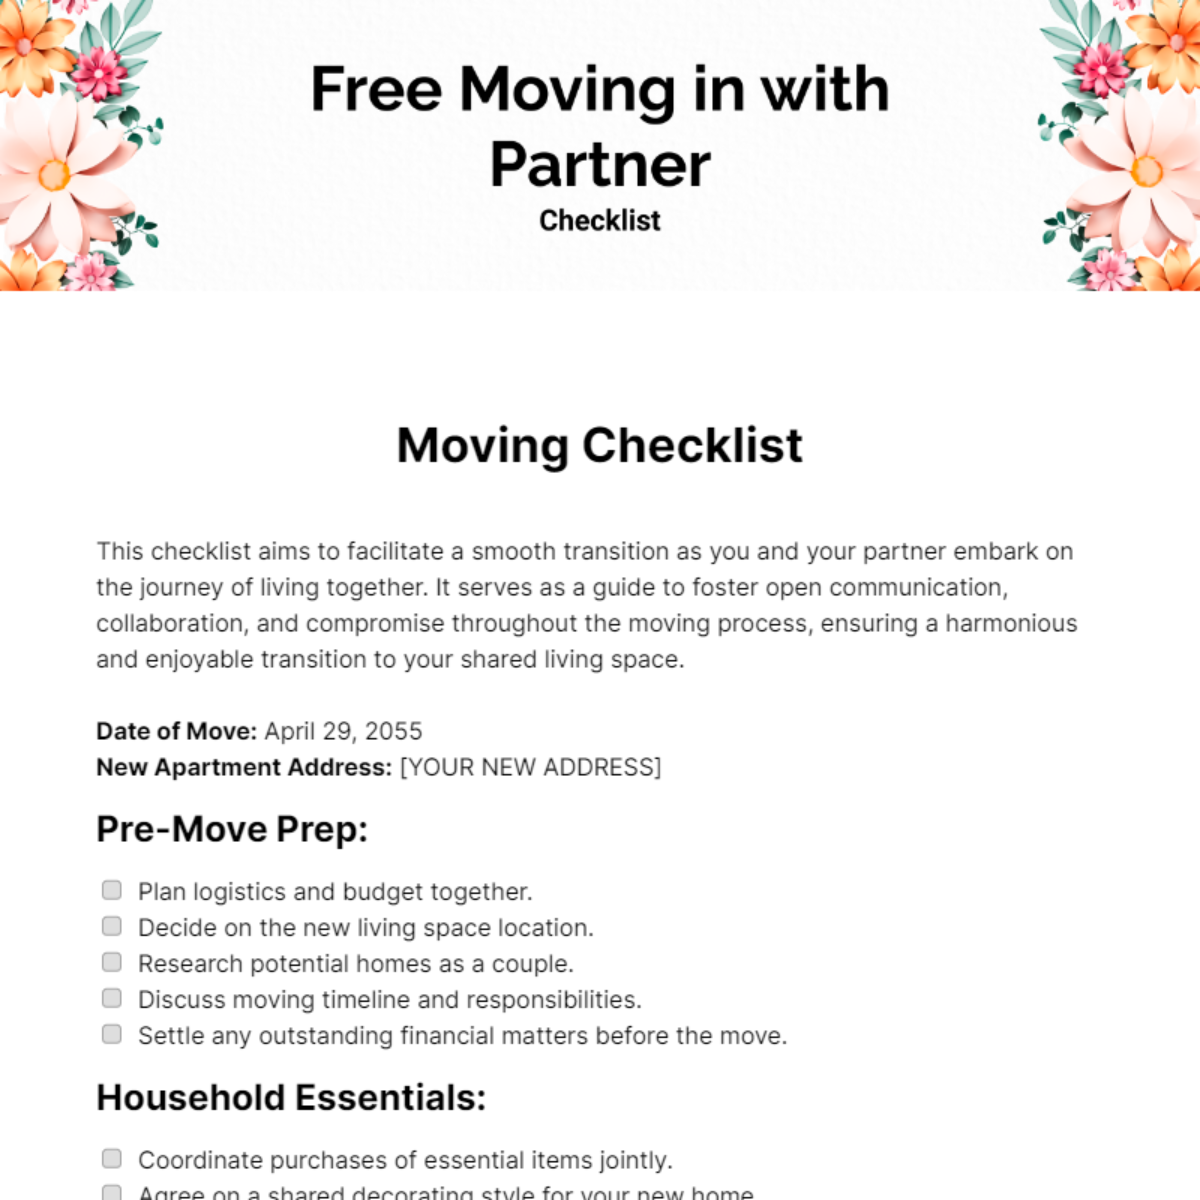 Free Moving in with Partner Checklist Template